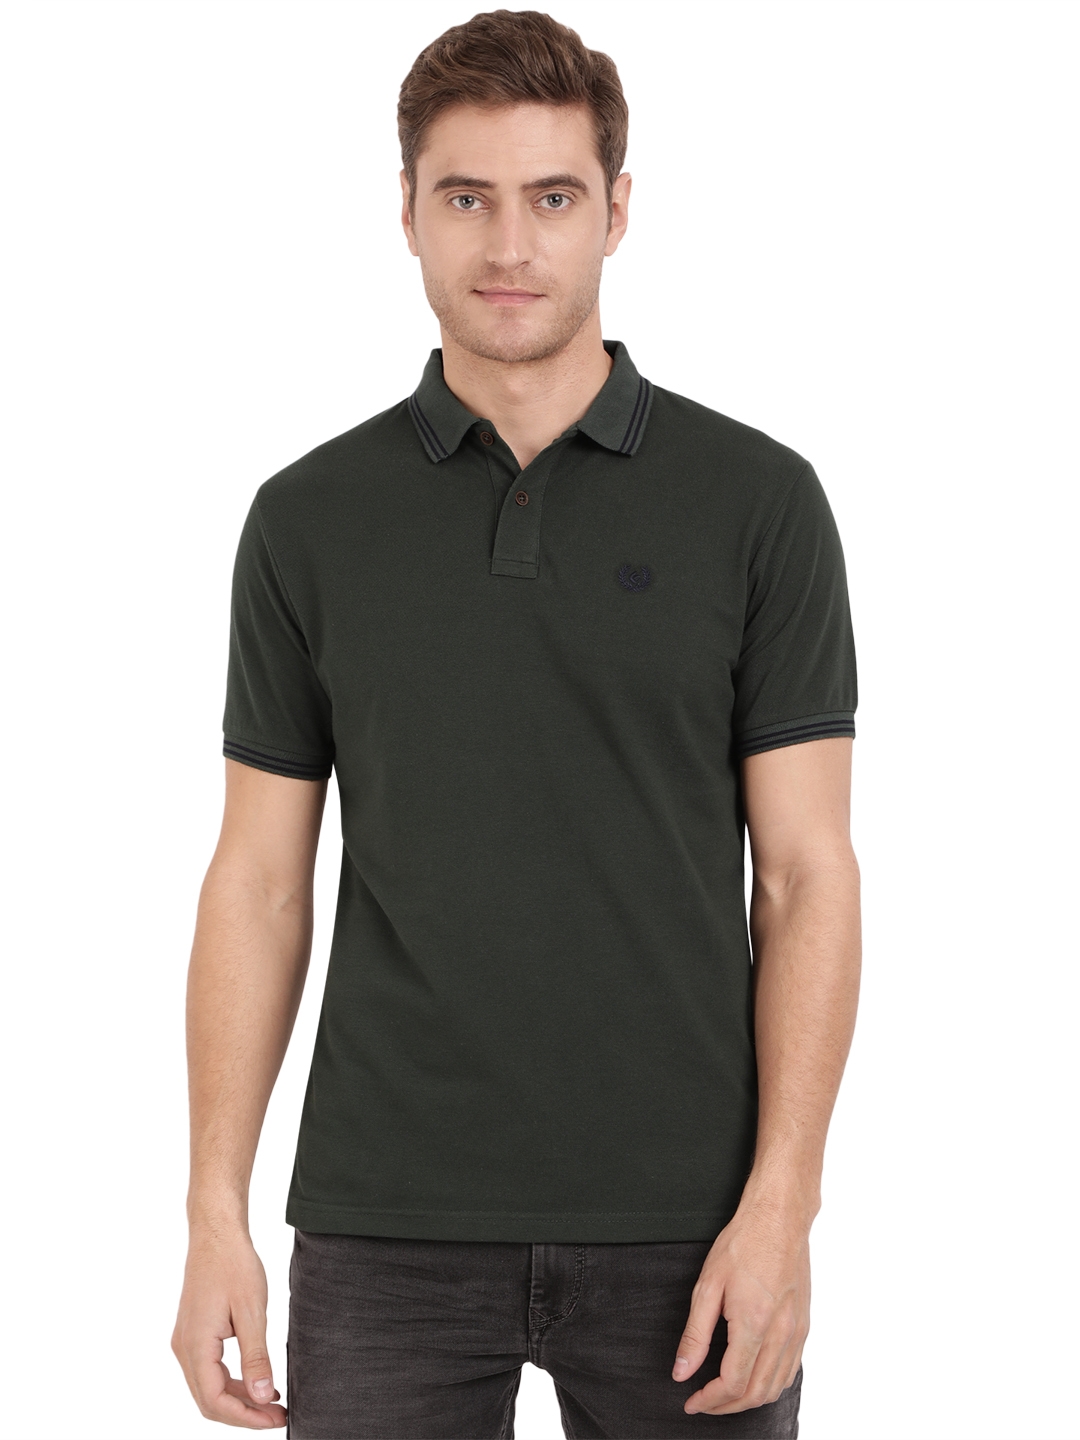 Greenfibre | Bottle Green Solid Slim Fit Polo T-Shirt | Greenfibre